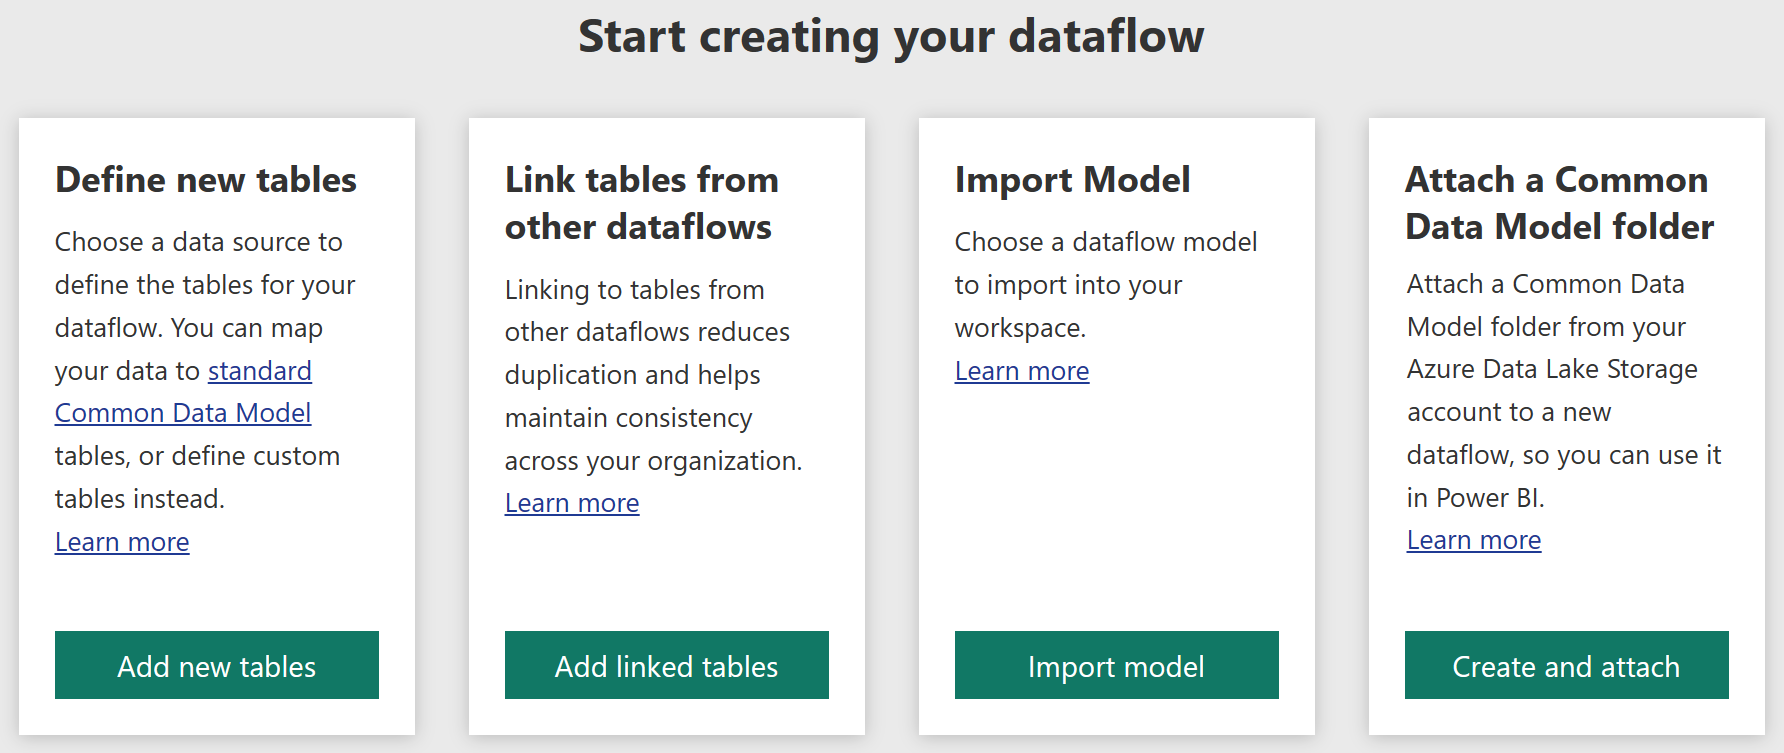 Create dataflow menu where "Define new tables", "Link tables from other dataflows", "Import model", and "Attach a Common Data Model folder" options appear